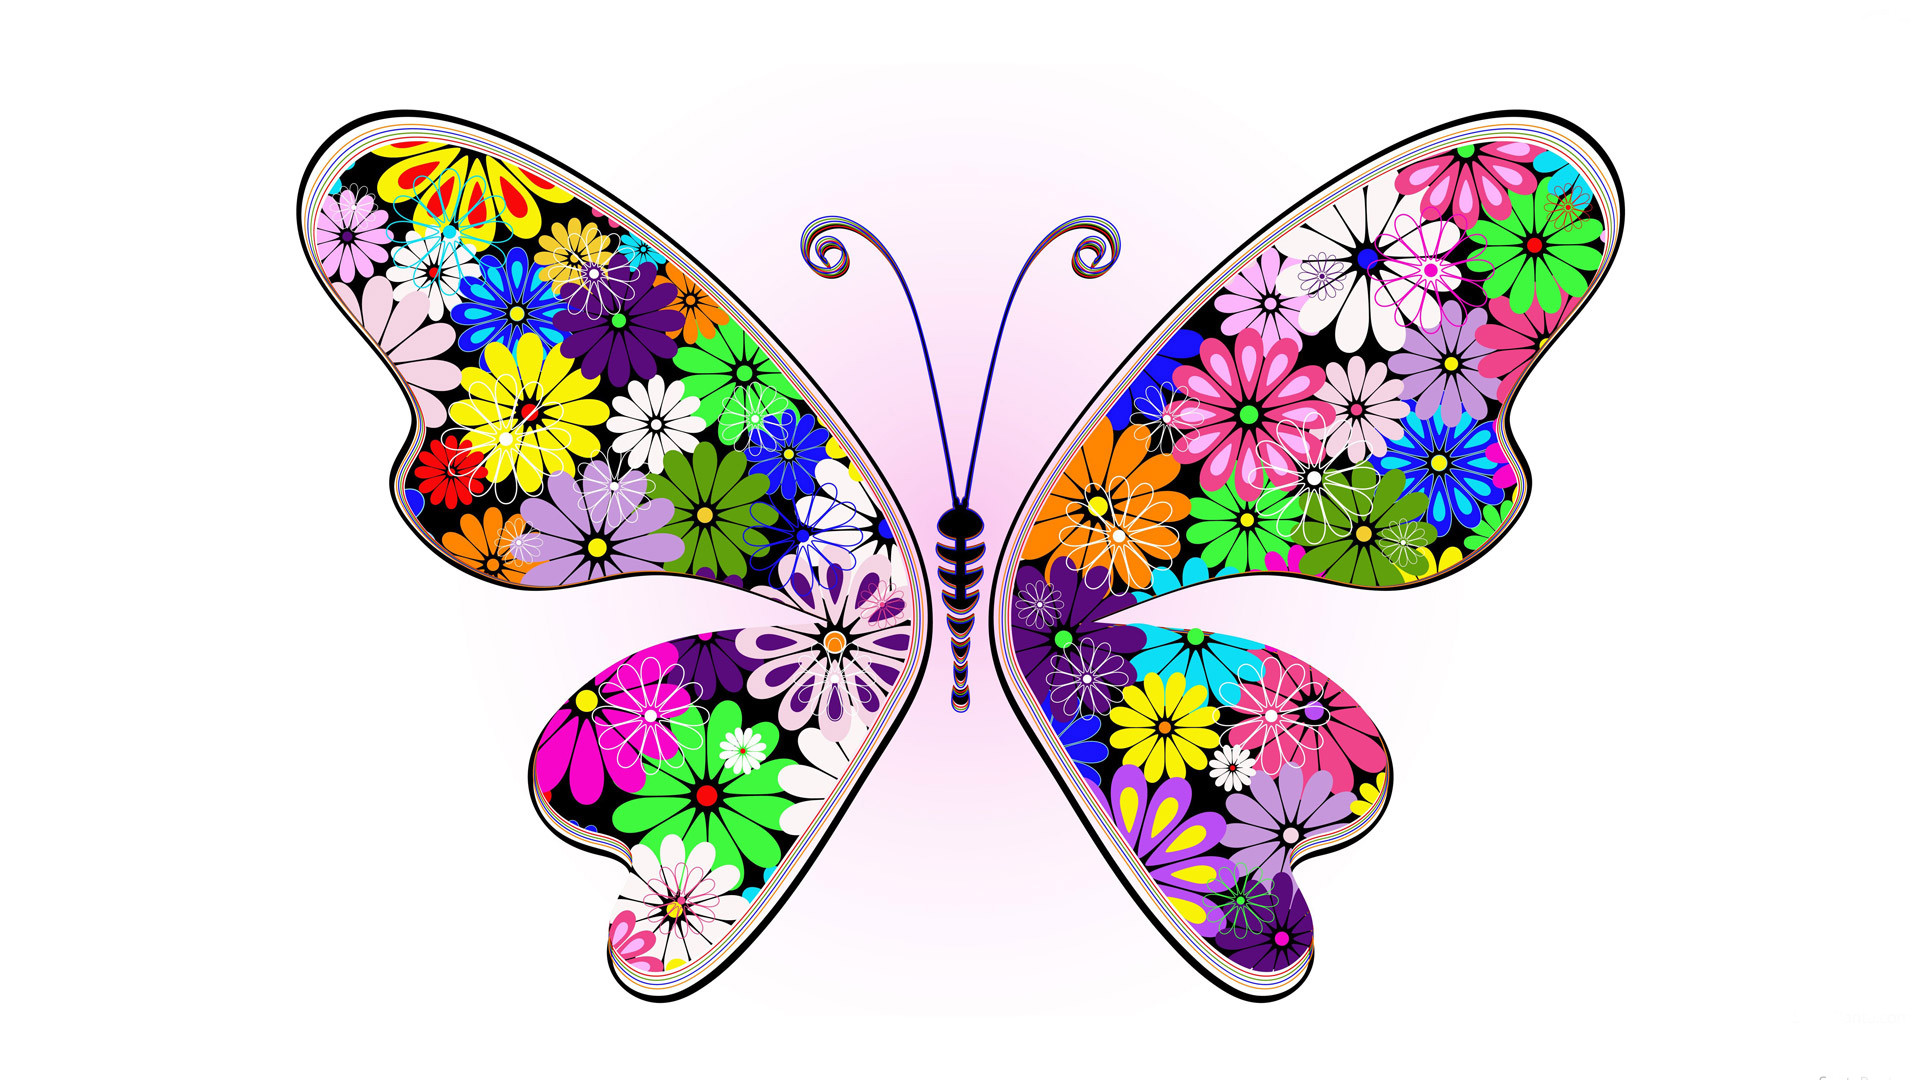 1920x1080, Abstract Colorful Butterfly Hd Images Only - Wallpaper - HD Wallpaper 